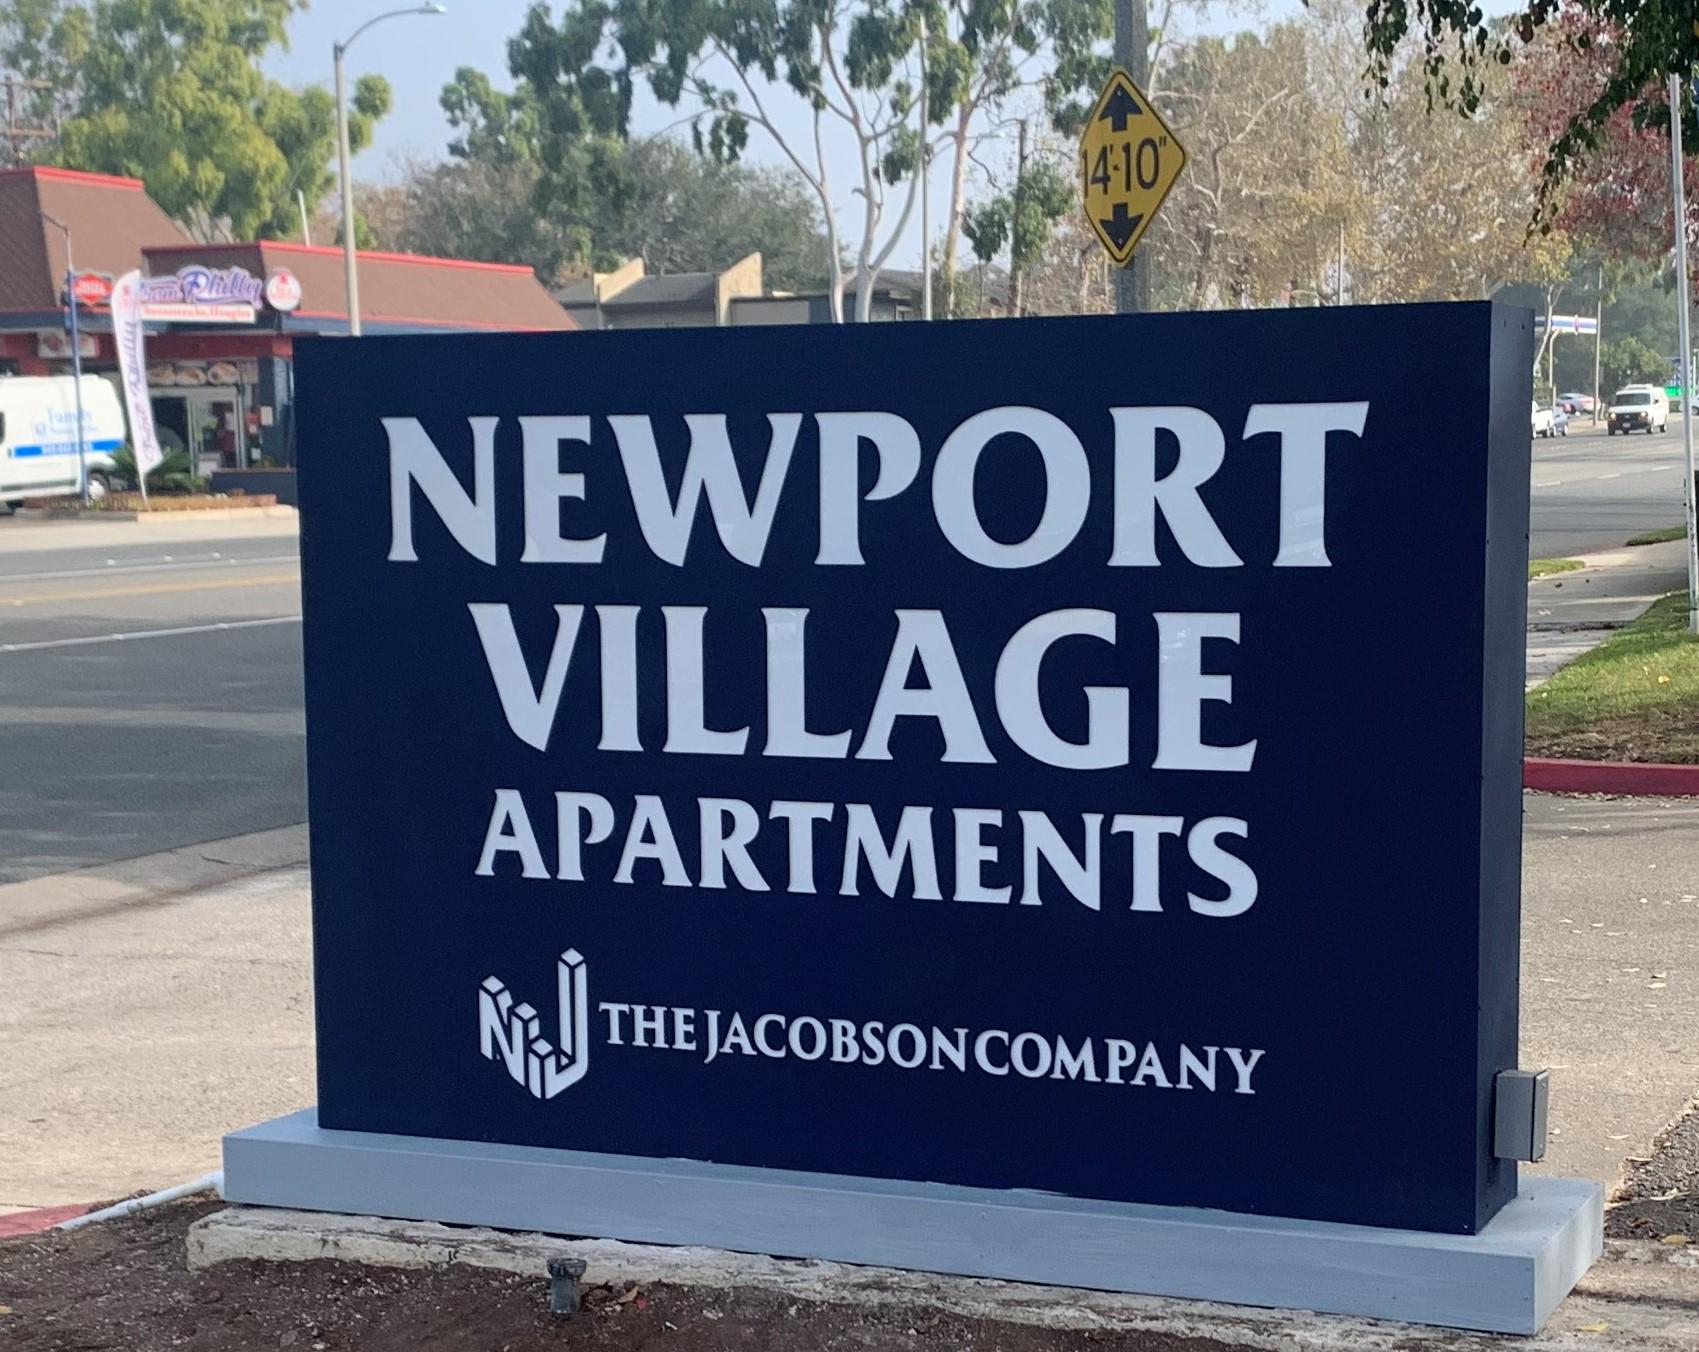 This is the real estate monument sign we fabricated for The Jacobson Company in Costa Mesa.